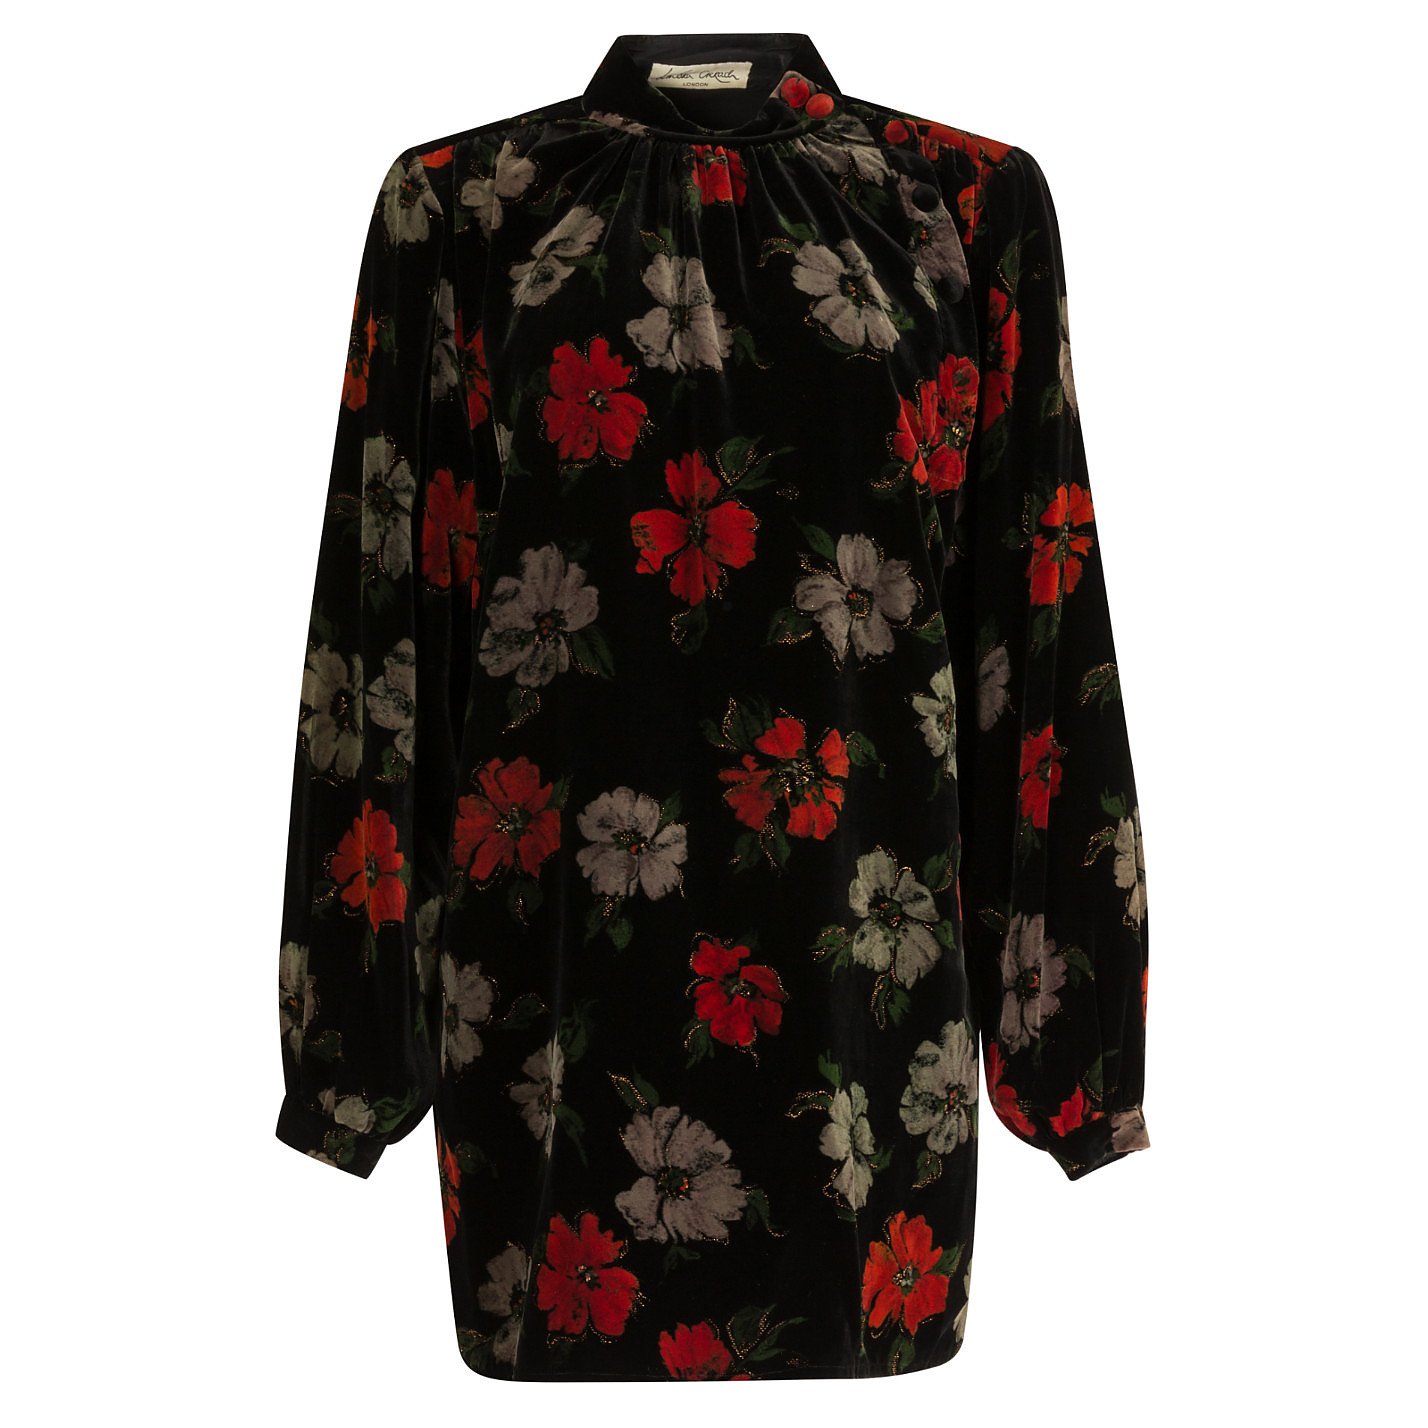 Rent or Buy Lindka Cierach Floral Velvet Tunic Dress from MyWardrobeHQ.com